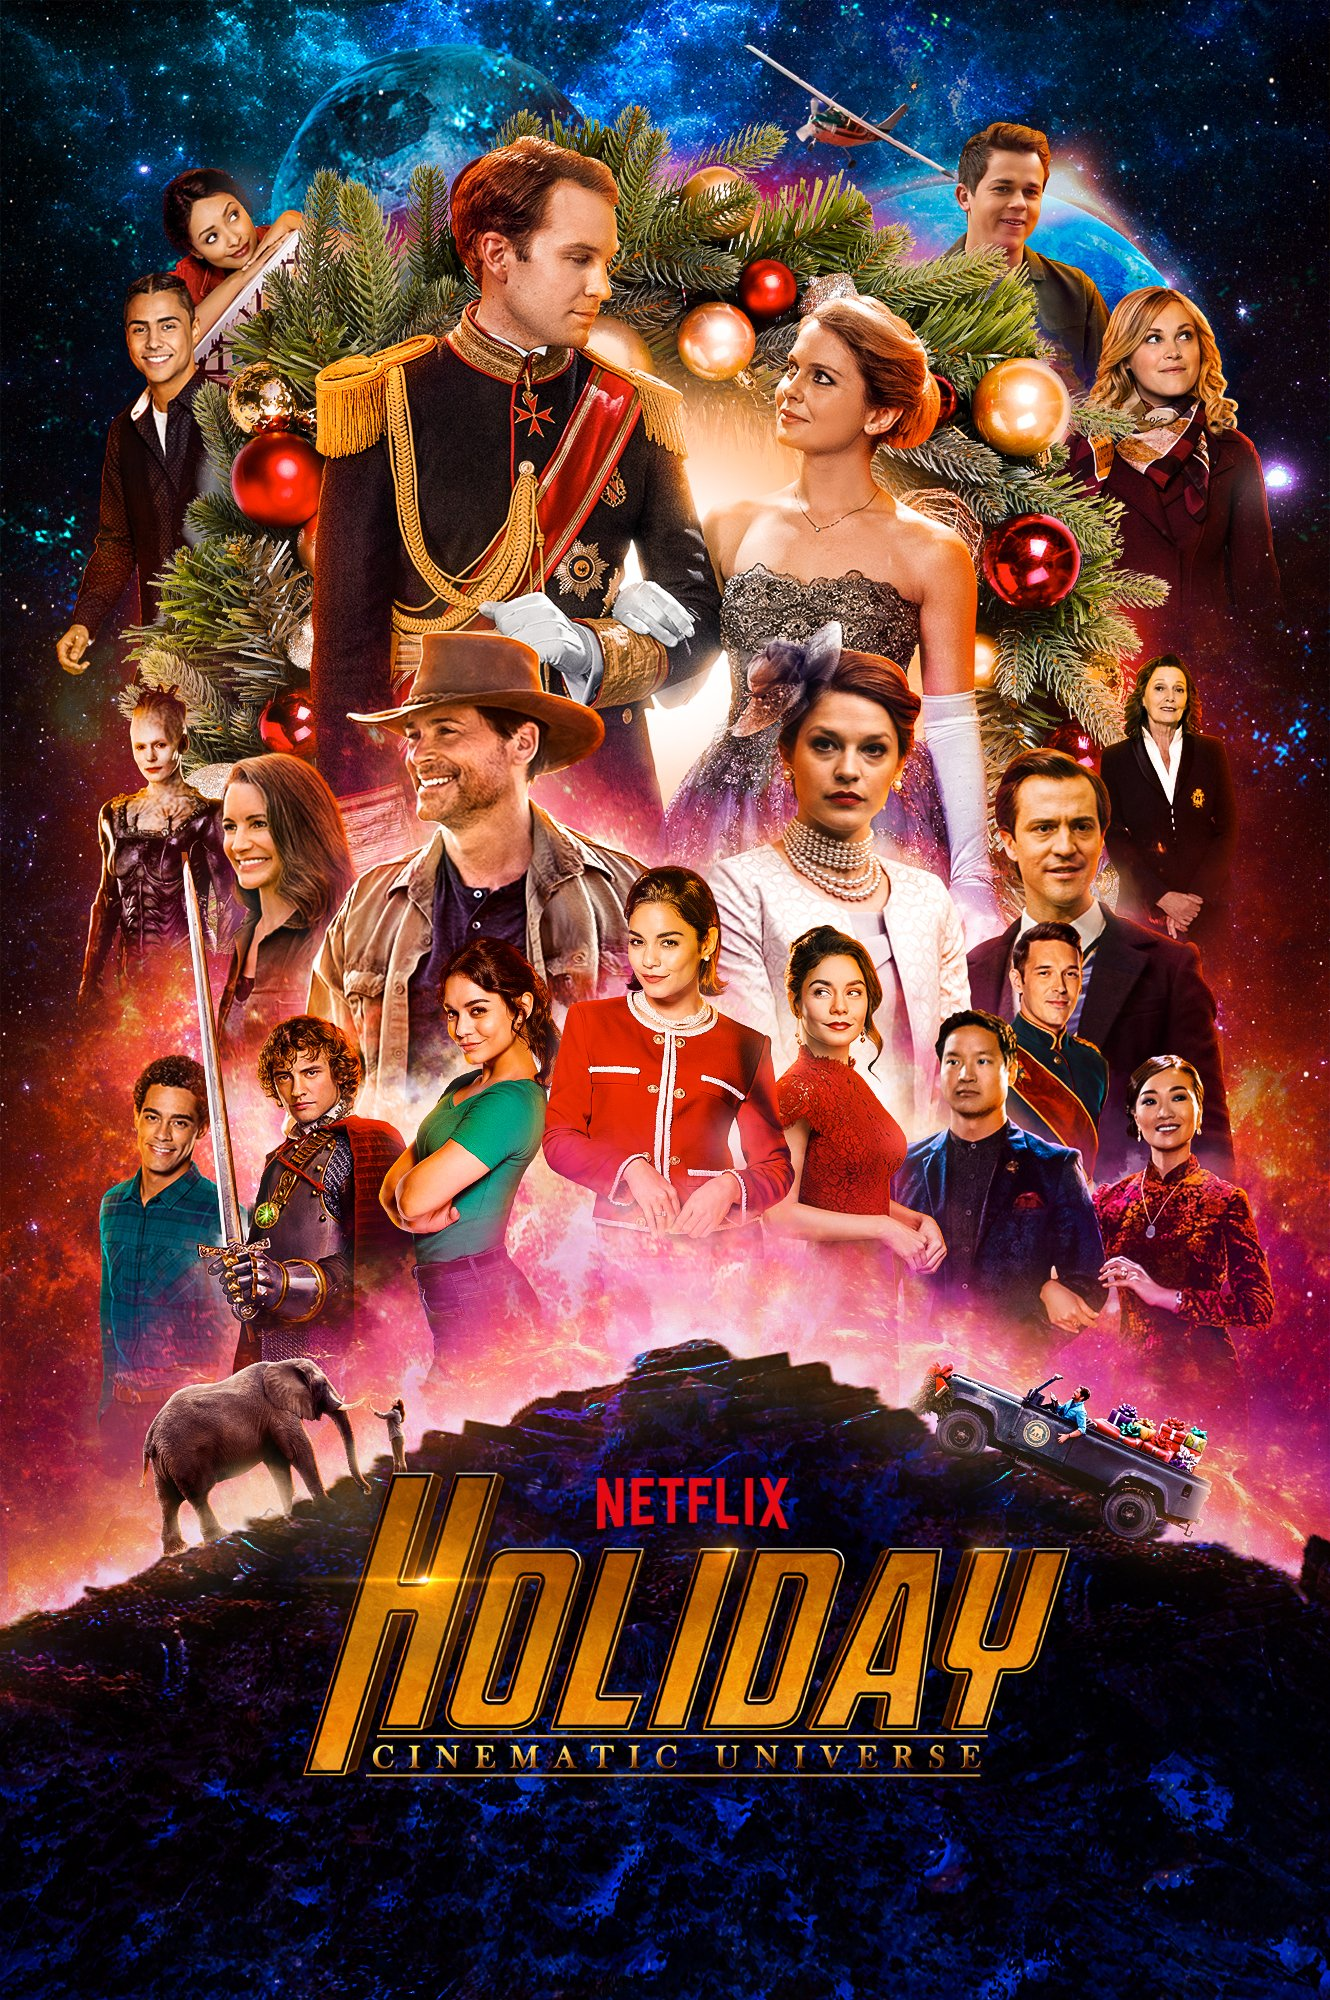 The Netflix Holiday Cinematic Universe - Poster